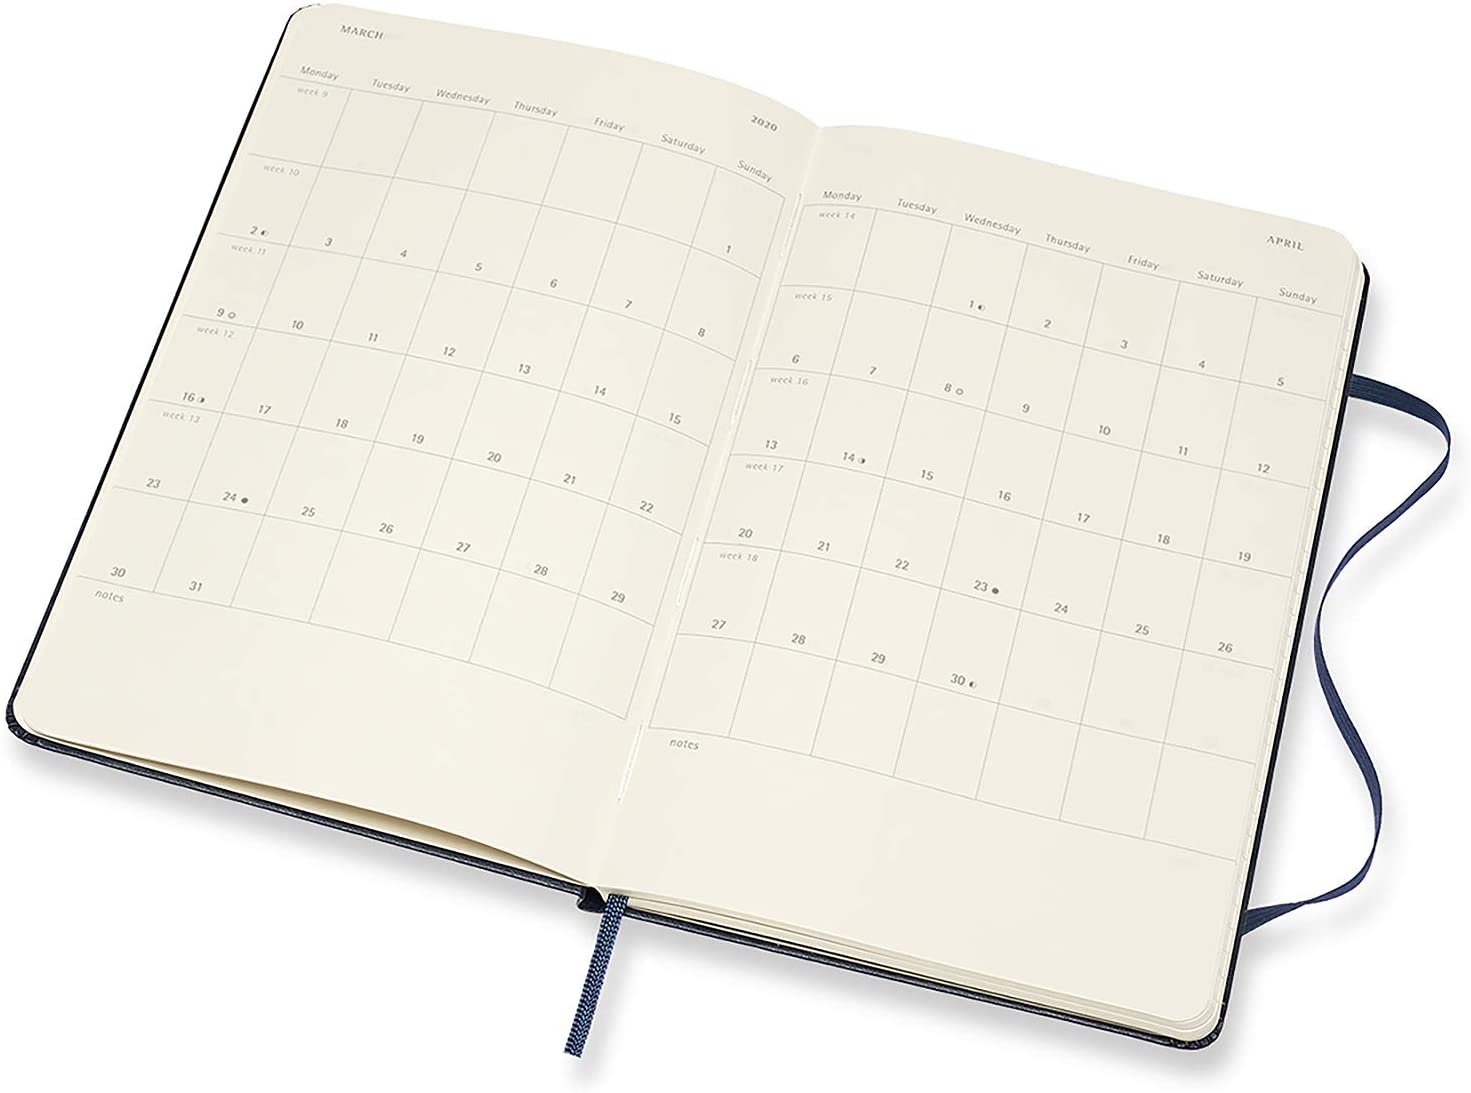 Moleskine - 12 Months Agenda Weekly Horizontal 2020  -  Hard Cover and Elastic Closure - Sapphire Blue Color - Large 13 x 21 cm - 144 Pages